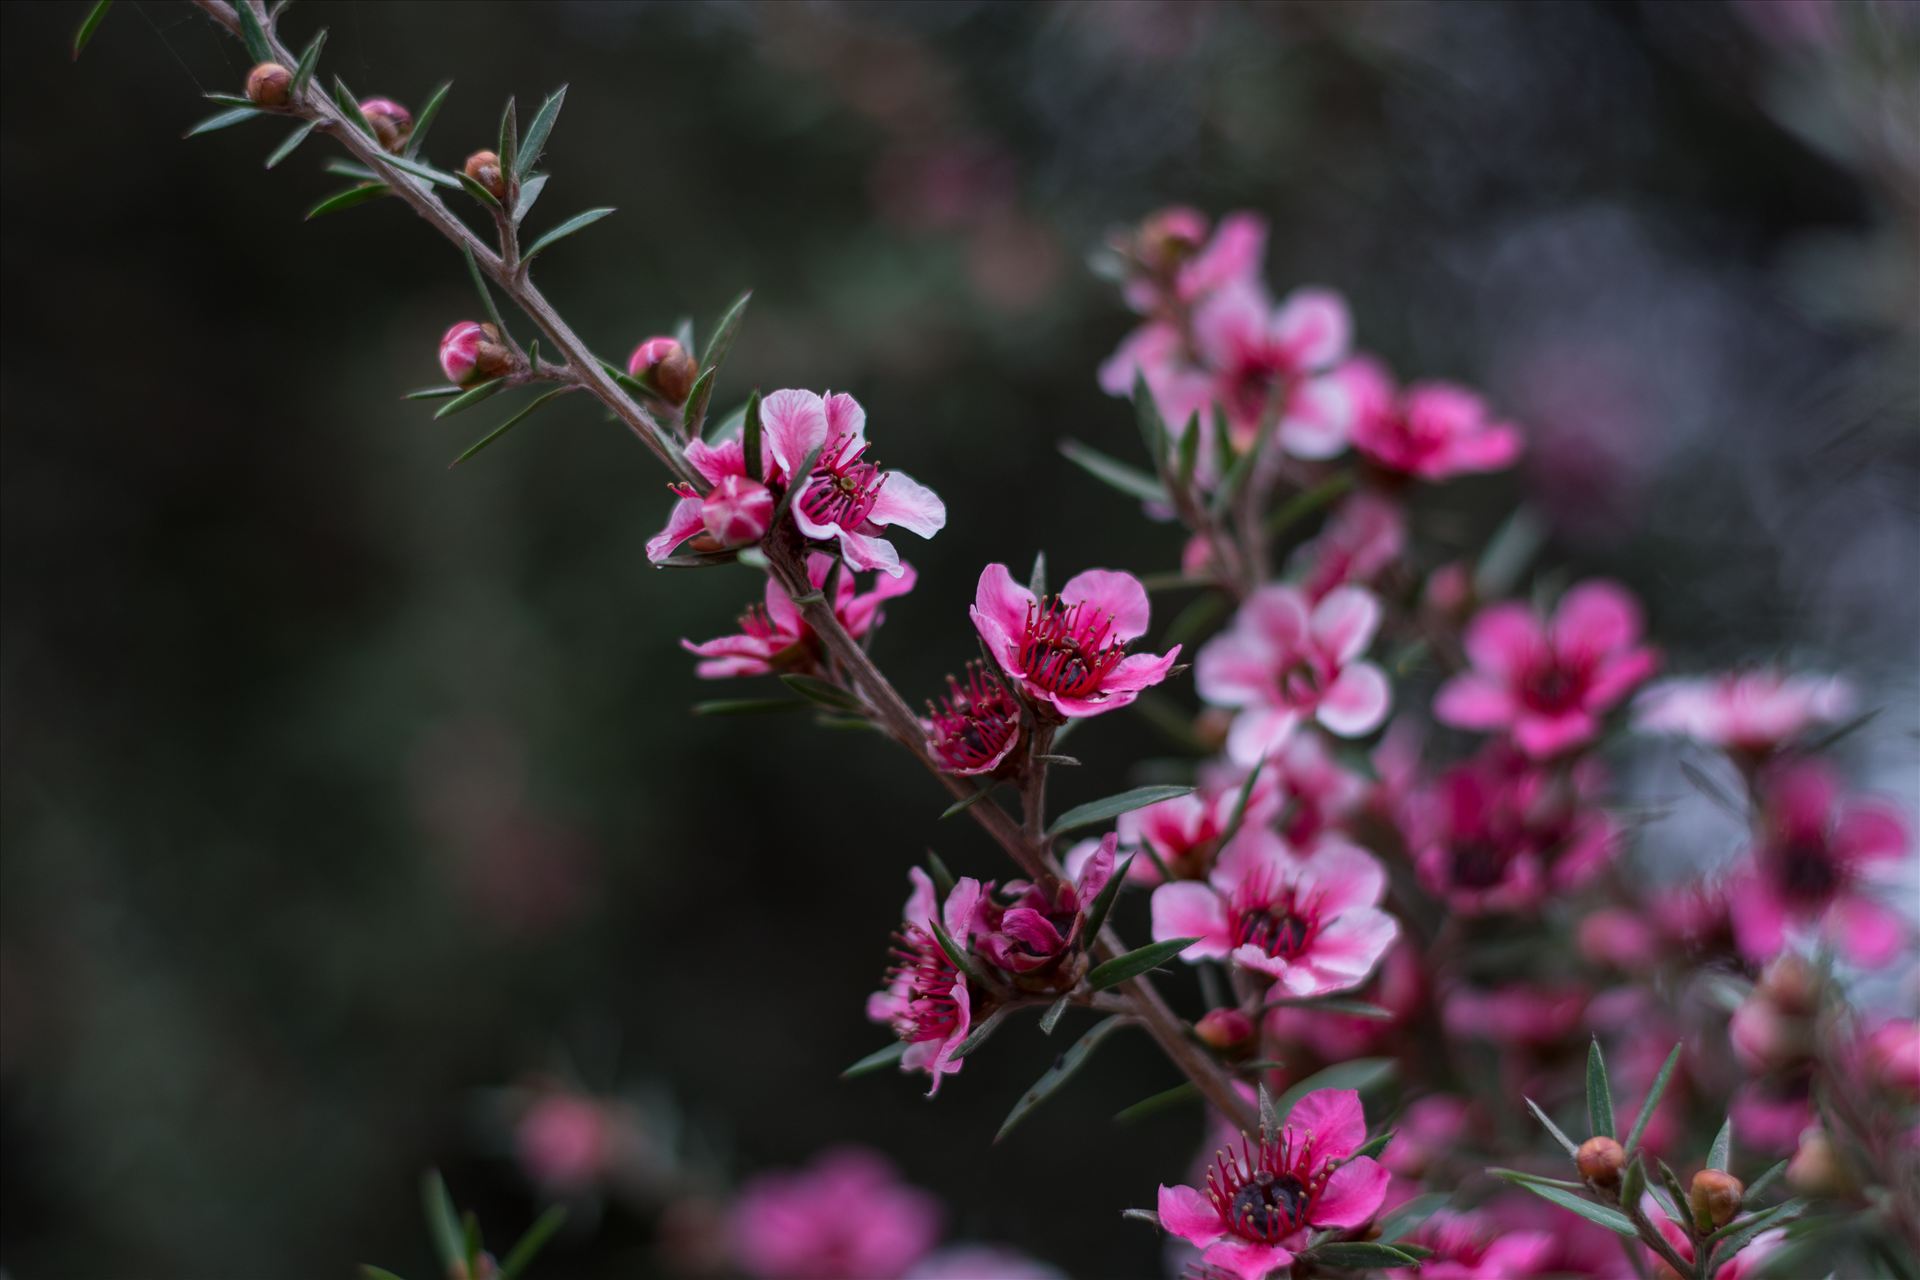 Pink Blossoms 2 10252015.jpg Pretty pink blossoms in the early morning light on the Central Coast of California. by Sarah Williams